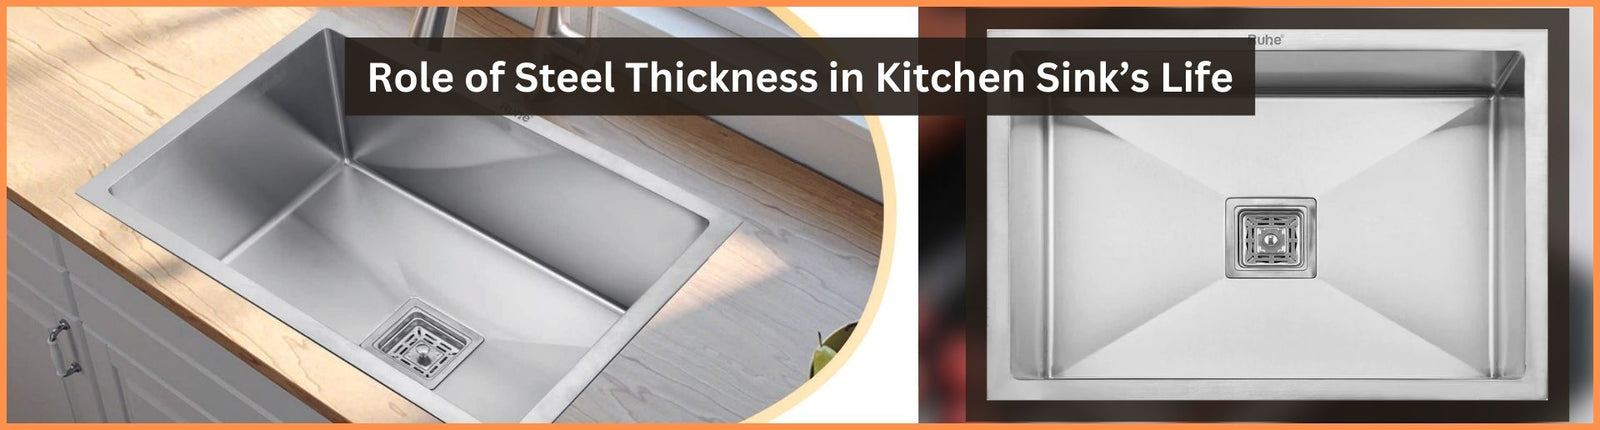 Role of Steel Thickness in Kitchen Sink’s Life